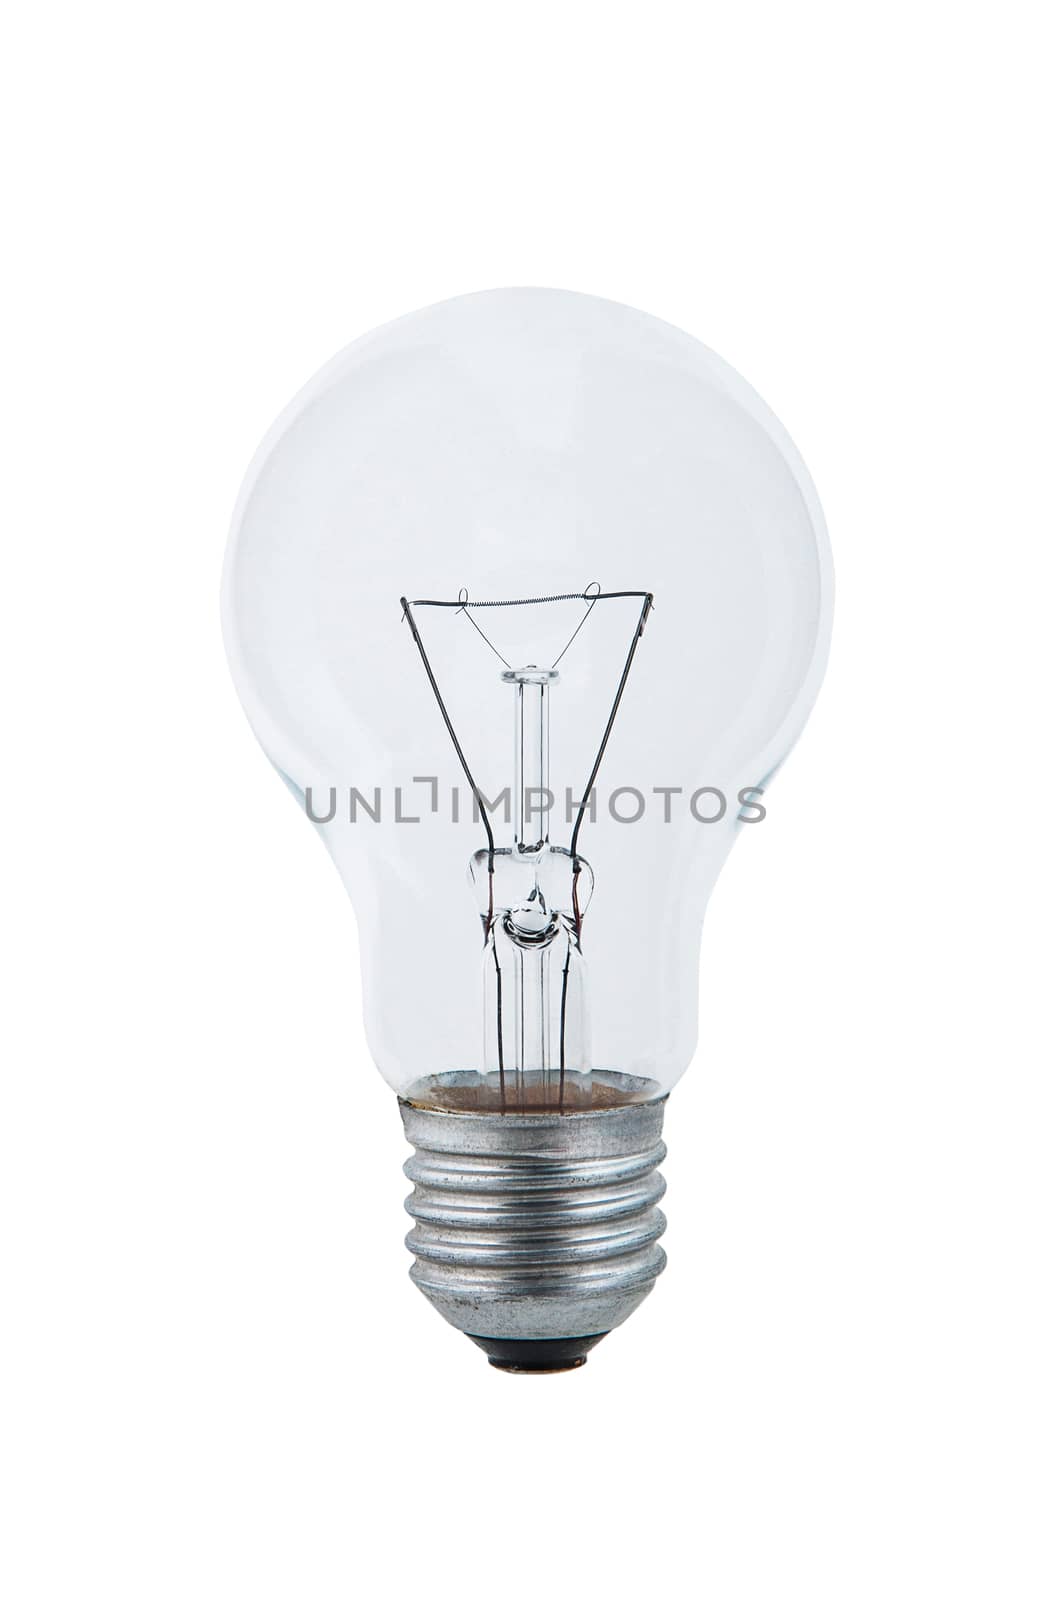 Light bulb by NuwatPhoto